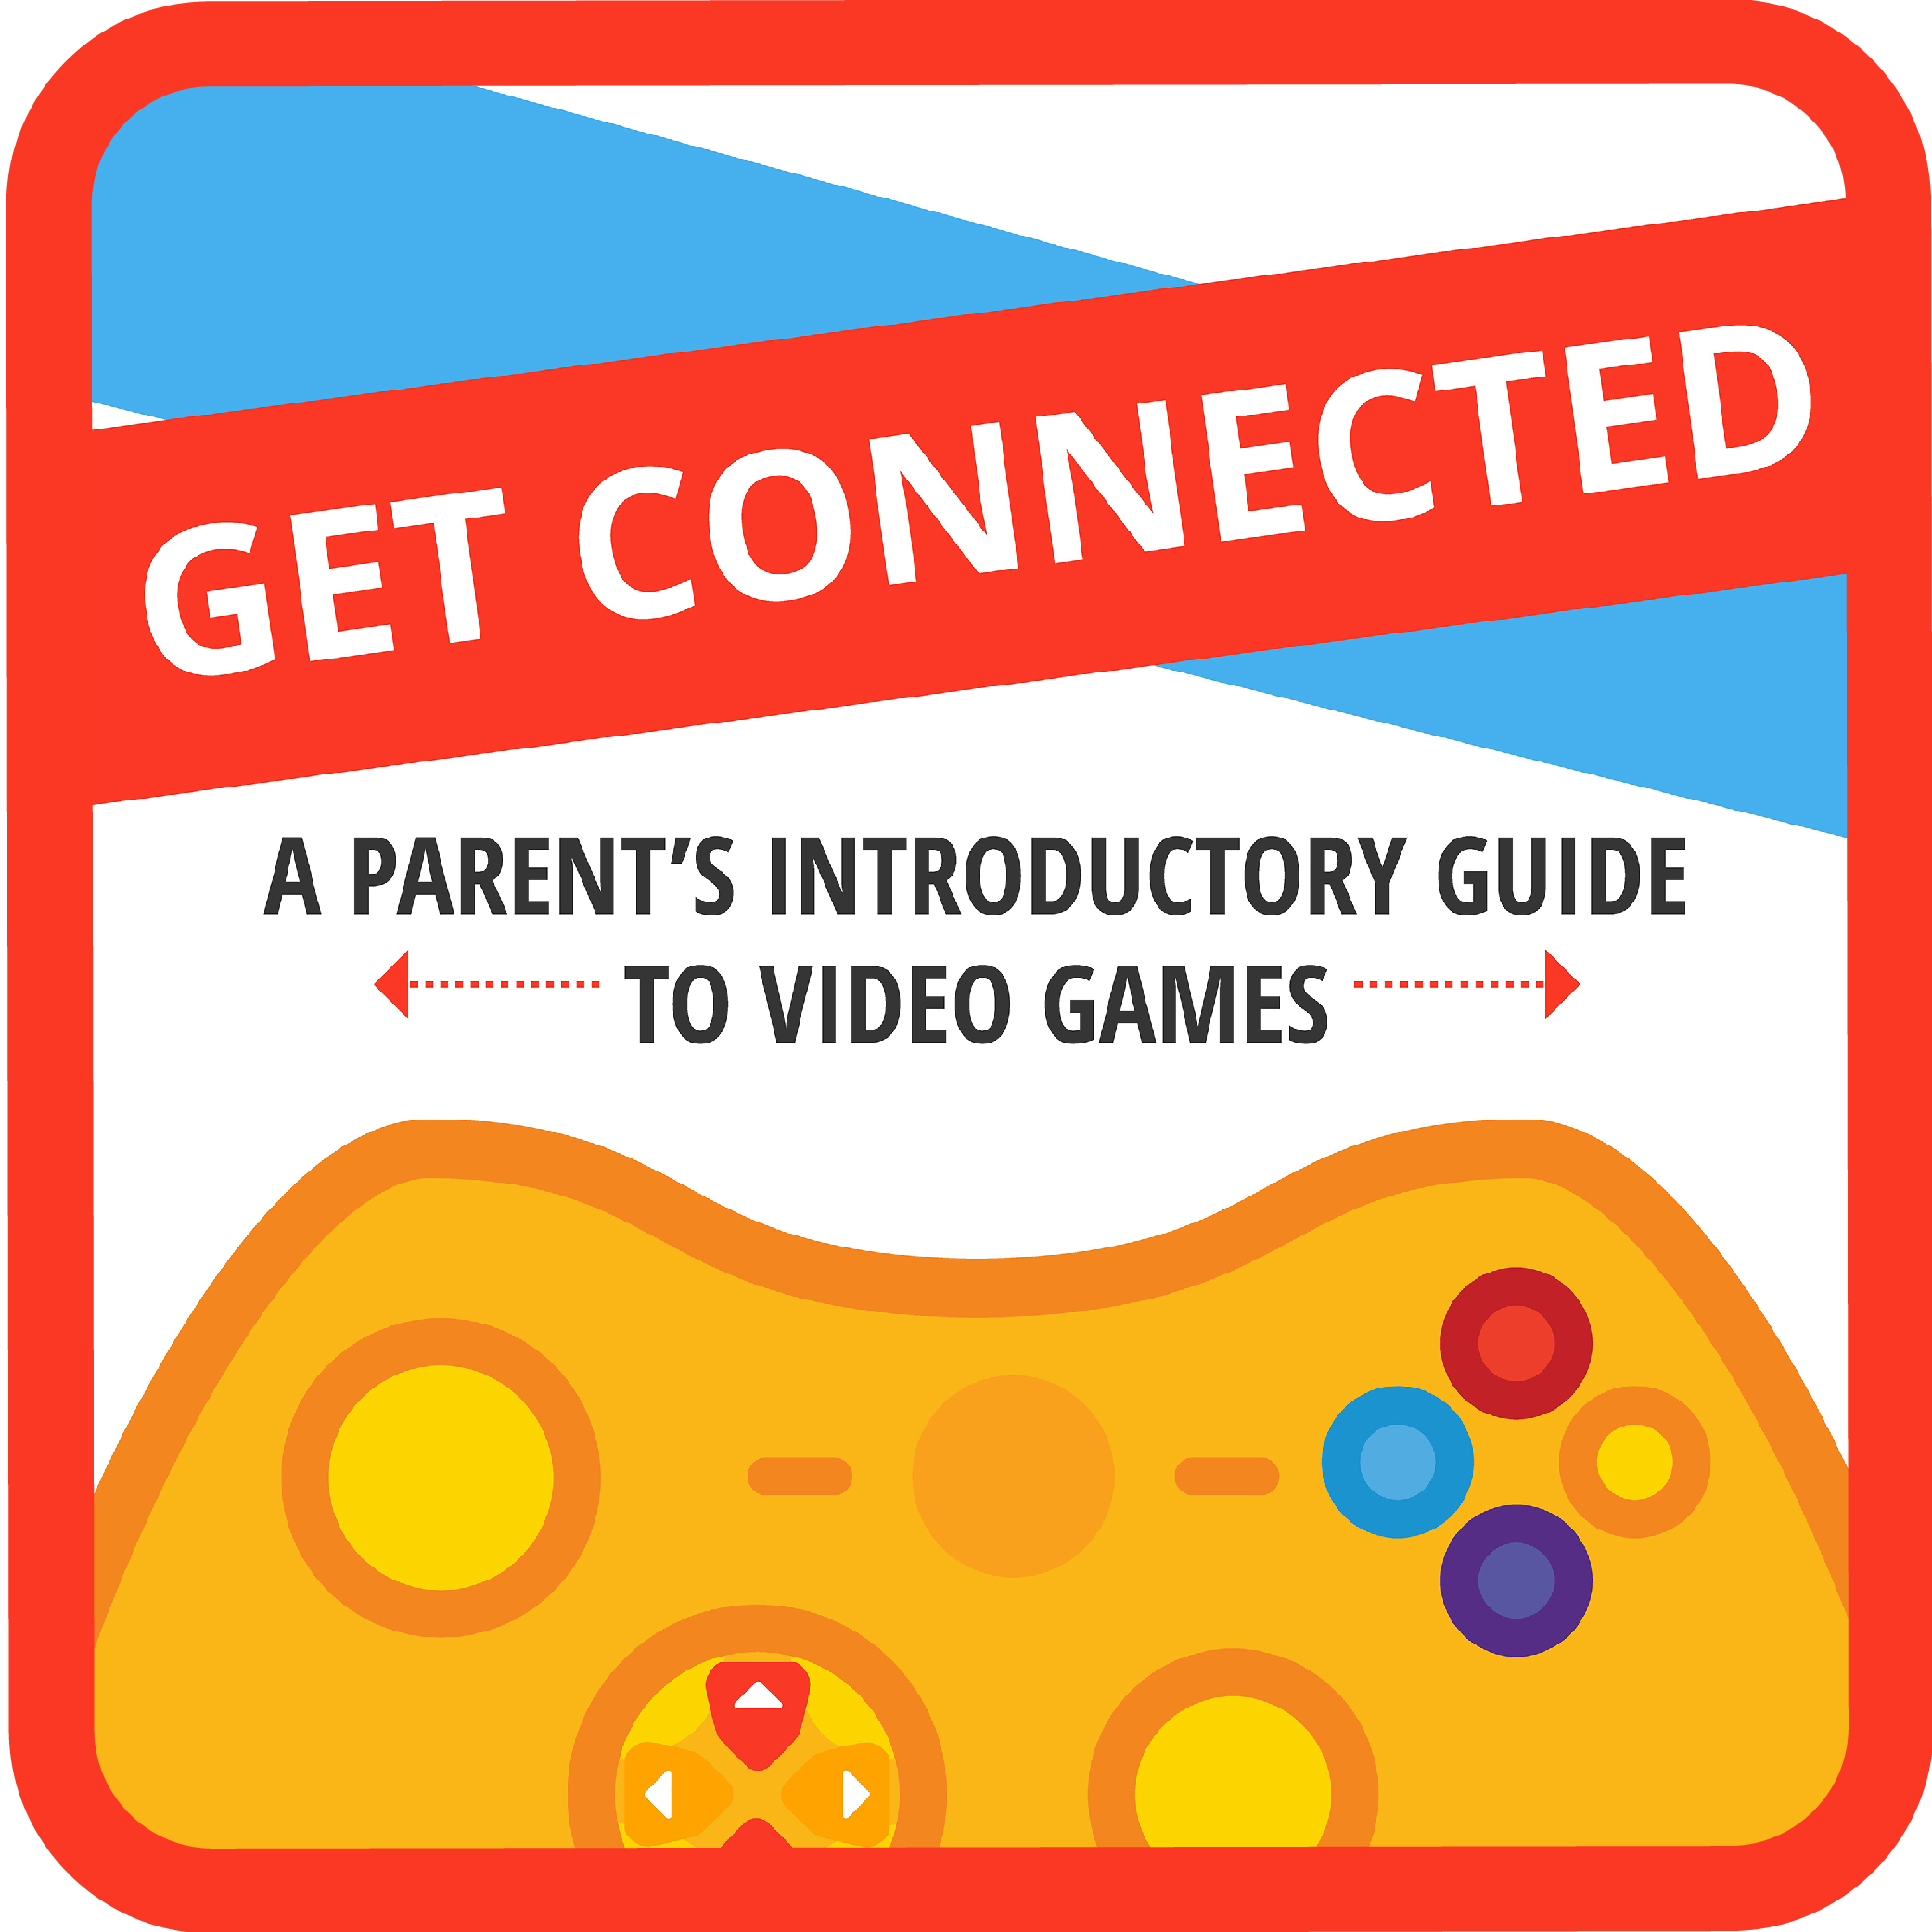 Get Connected E-book